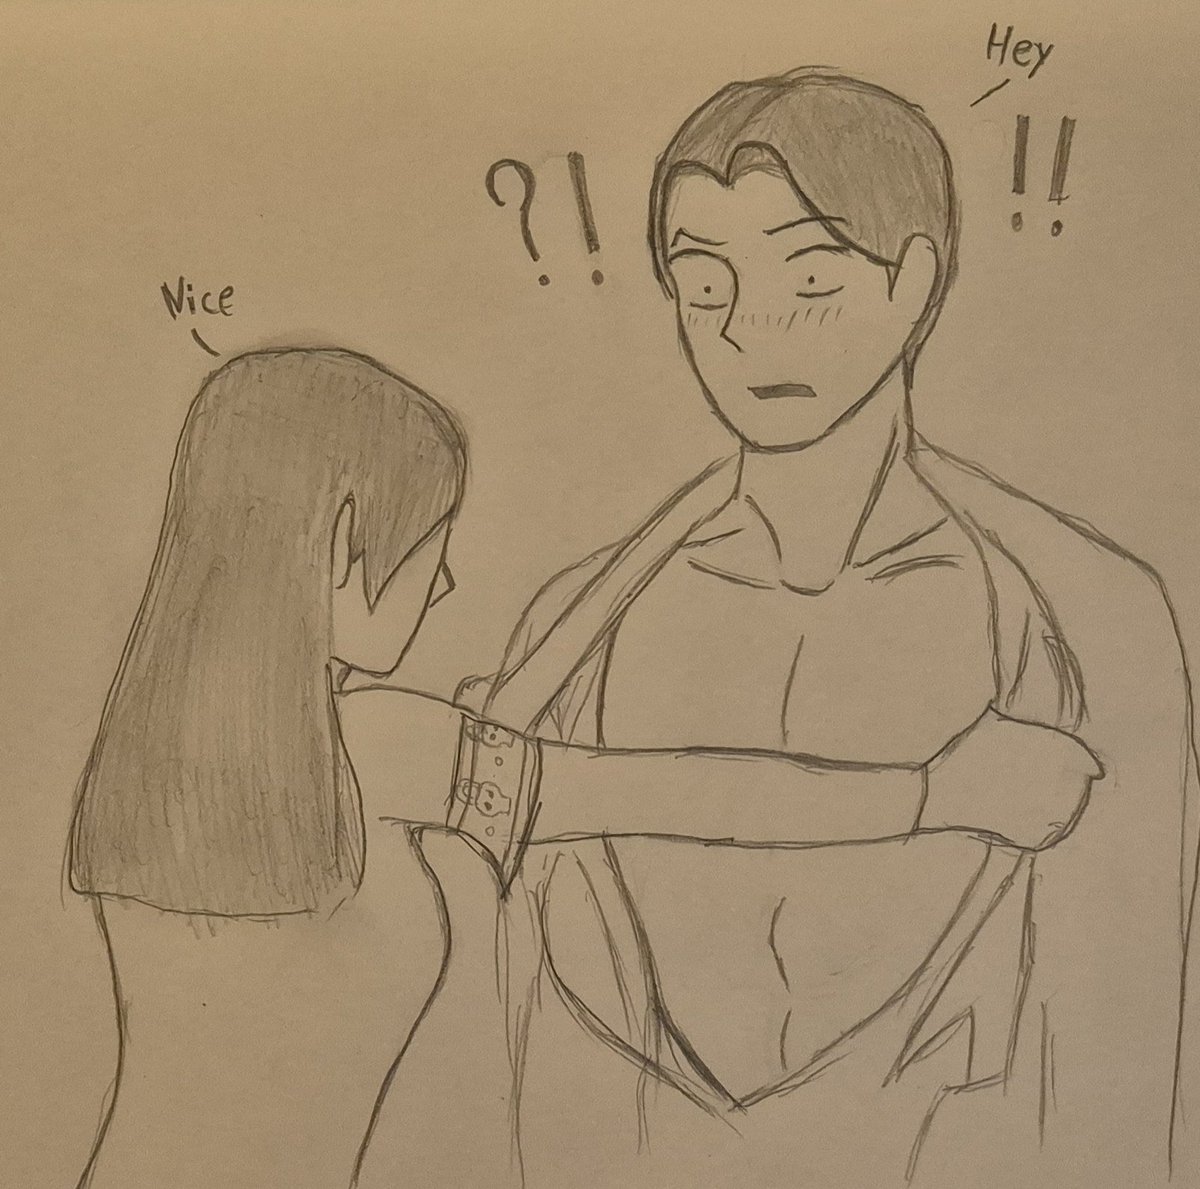 Without warning, she rips open his shirt and looks at him closely. 

(One picture or another has led me to draw this picture 🤷🏻‍♀️)
#RogueTrader #Heinrix #HeinrixvanCalox